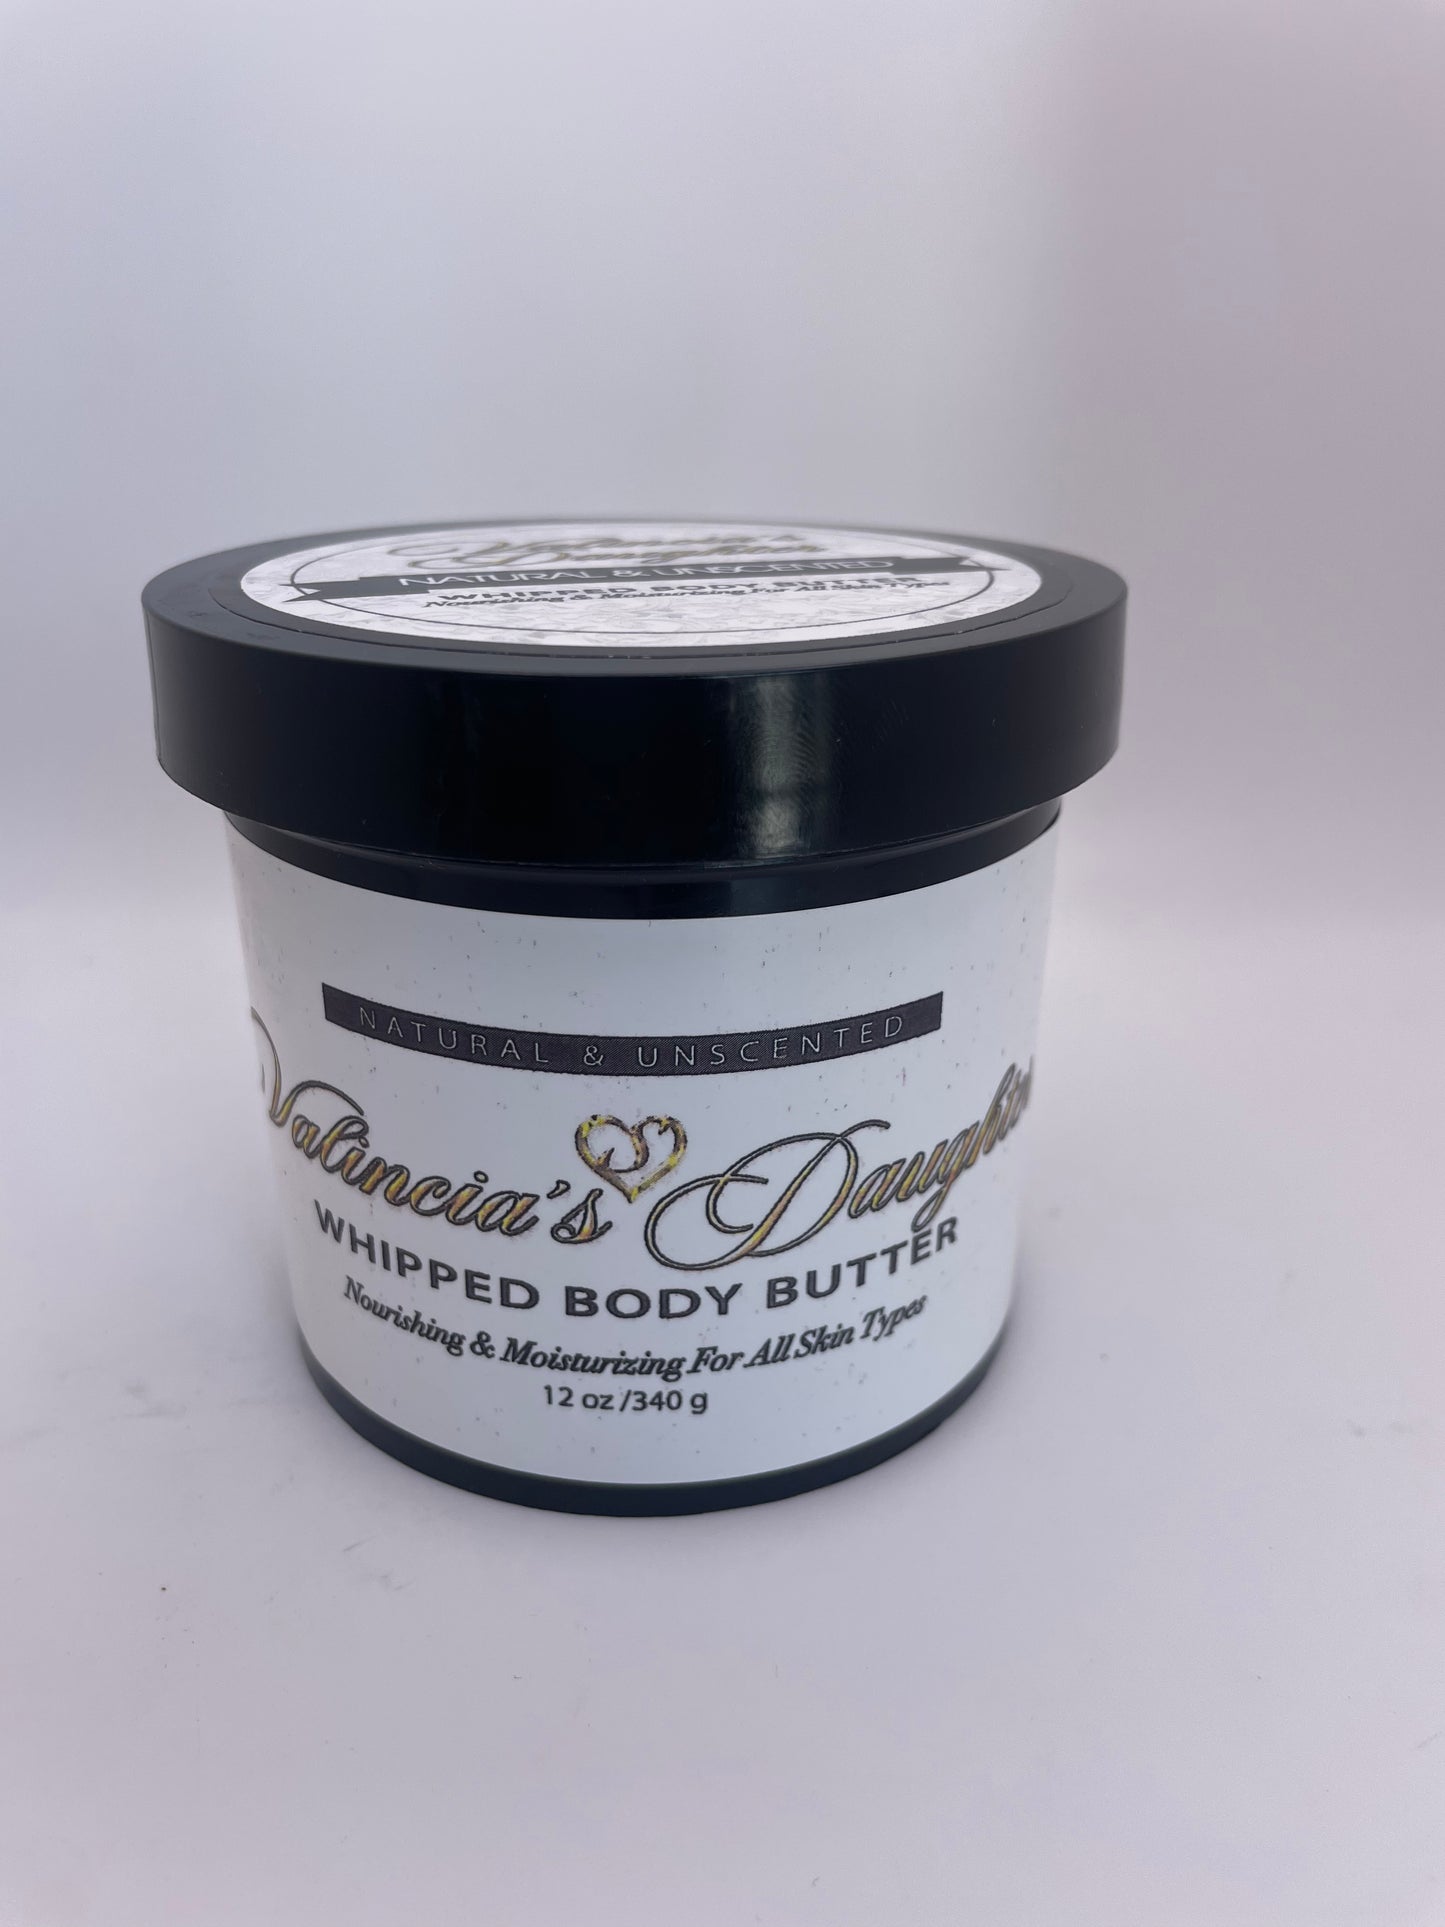 The Natural & Unscented Whipped Body Butter